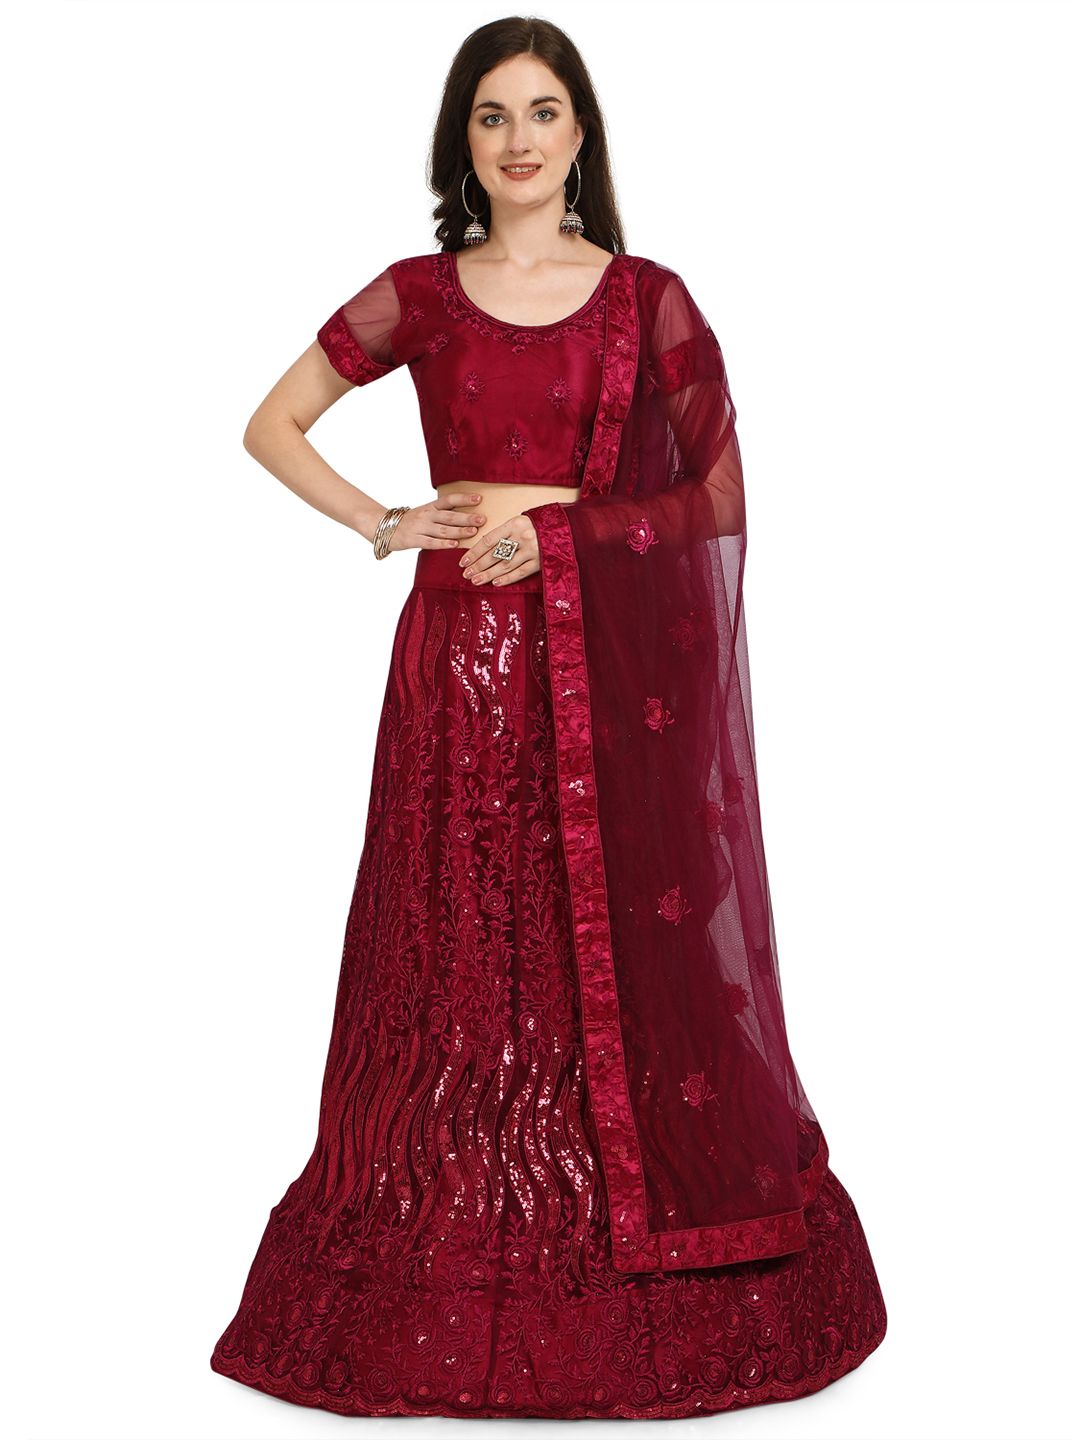 V SALES Maroon Embellished Semi-Stitched Lehenga & Unstitched Blouse with Dupatta Price in India